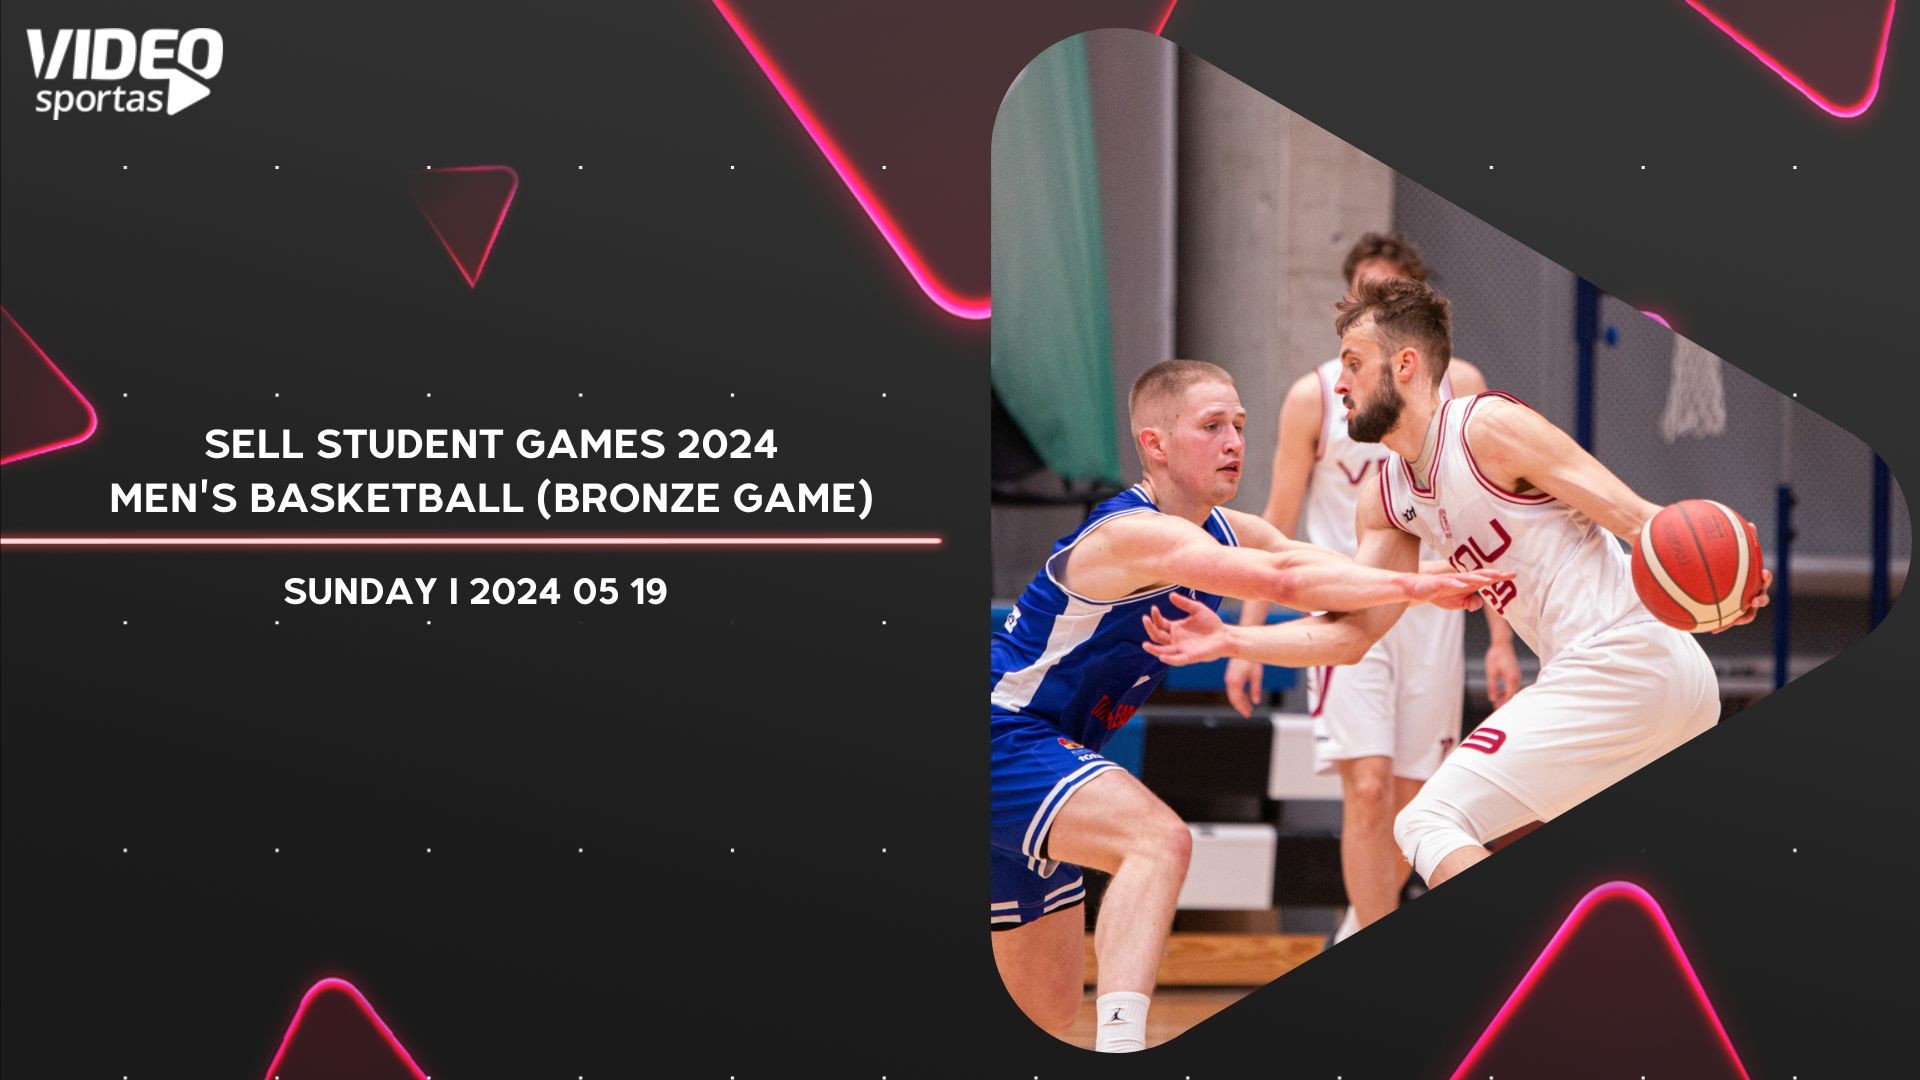 BRONZE GAME - SELL STUDENT GAMES 2024 (MEN'S BASKETBALL)